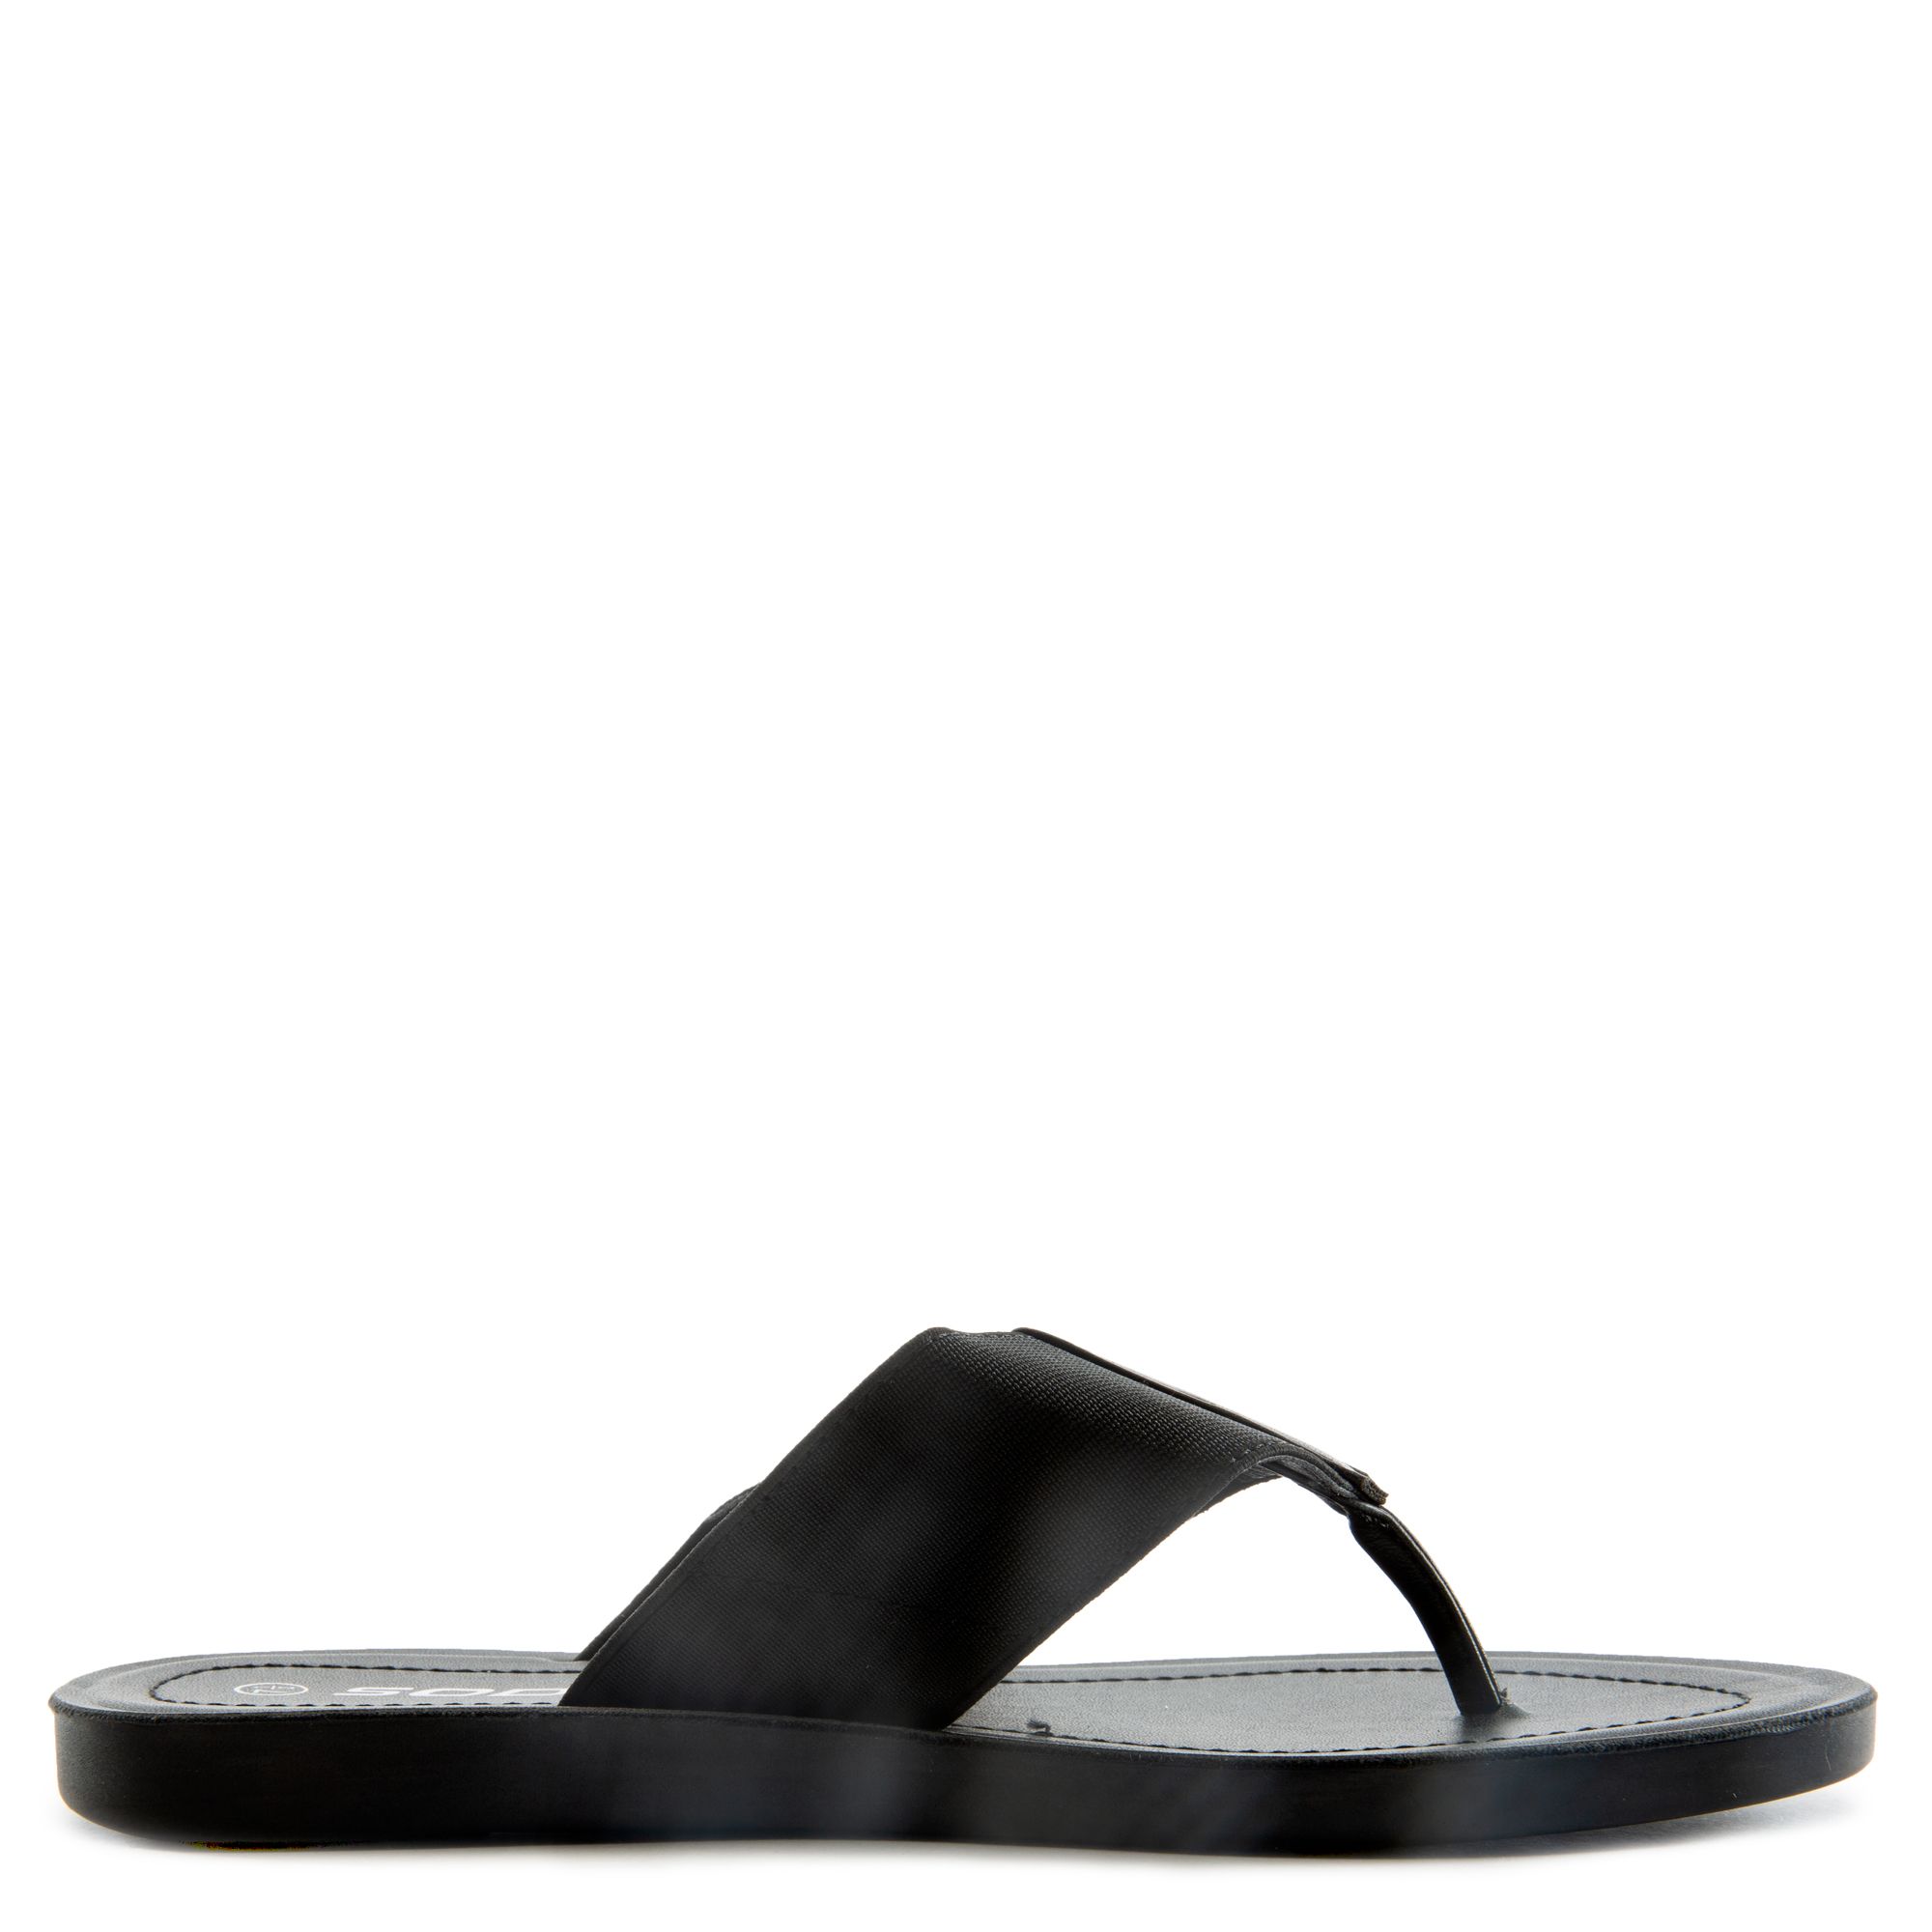 FORTUNE DYNAMICS Telly-S Elastic Sandals FD TELLY-S-BLK - Shiekh